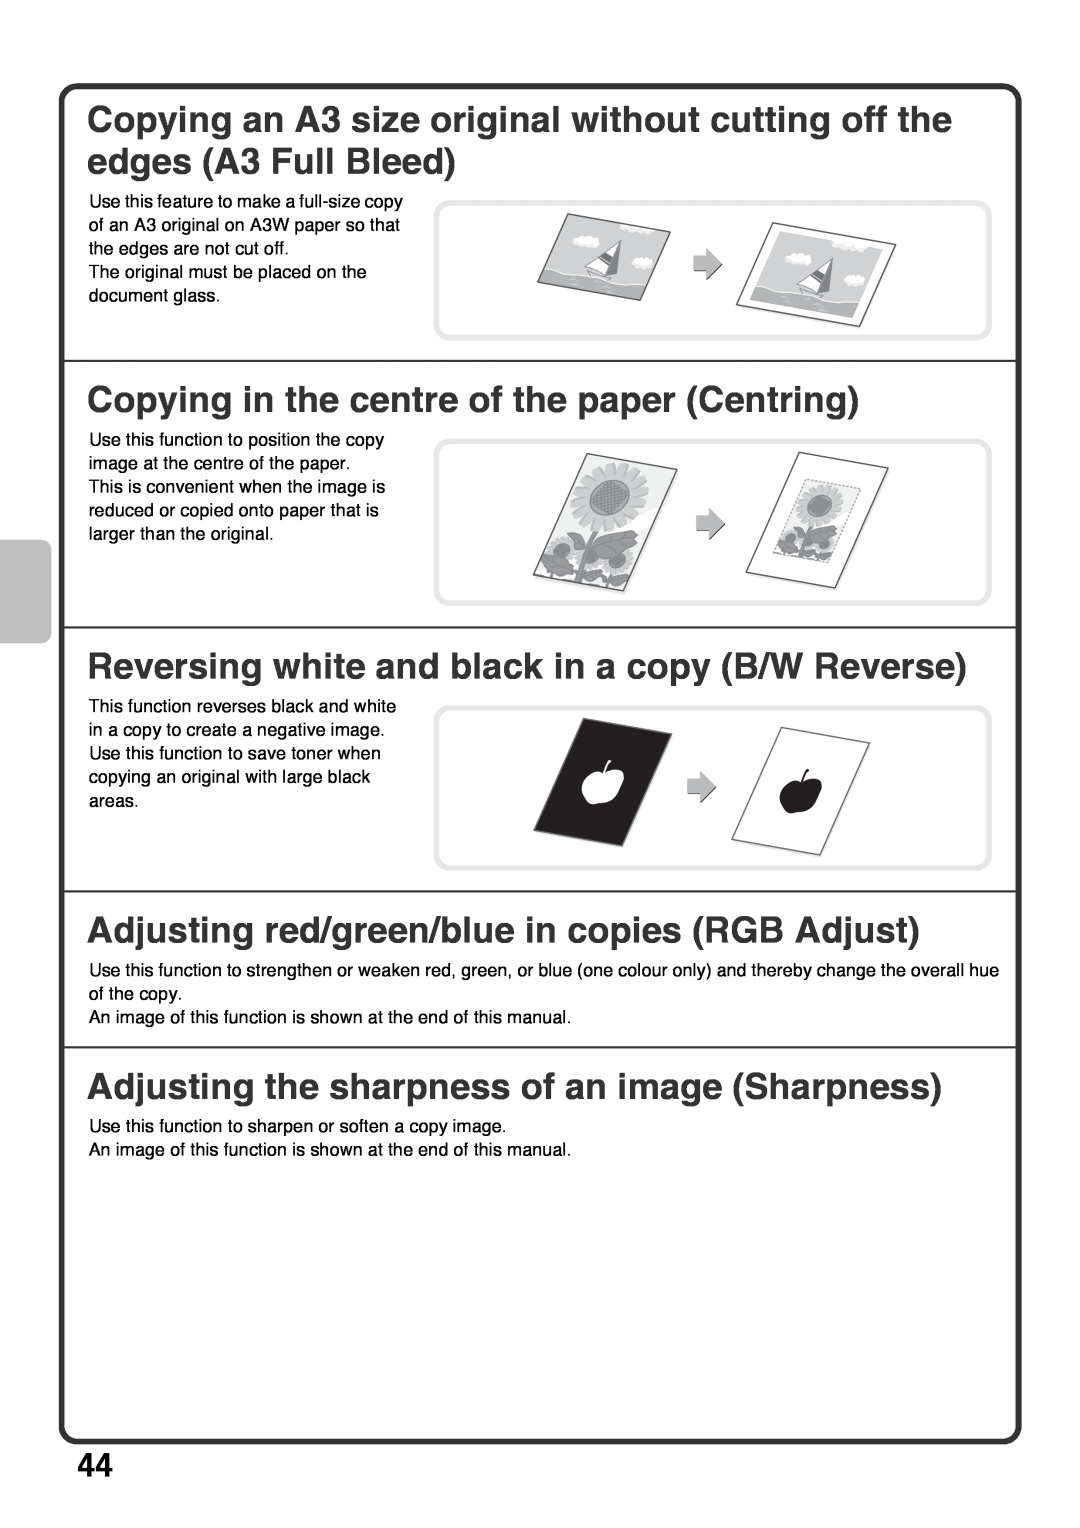 Sharp MX-4101N, MX-4100N Copying in the centre of the paper Centring, Reversing white and black in a copy B/W Reverse 